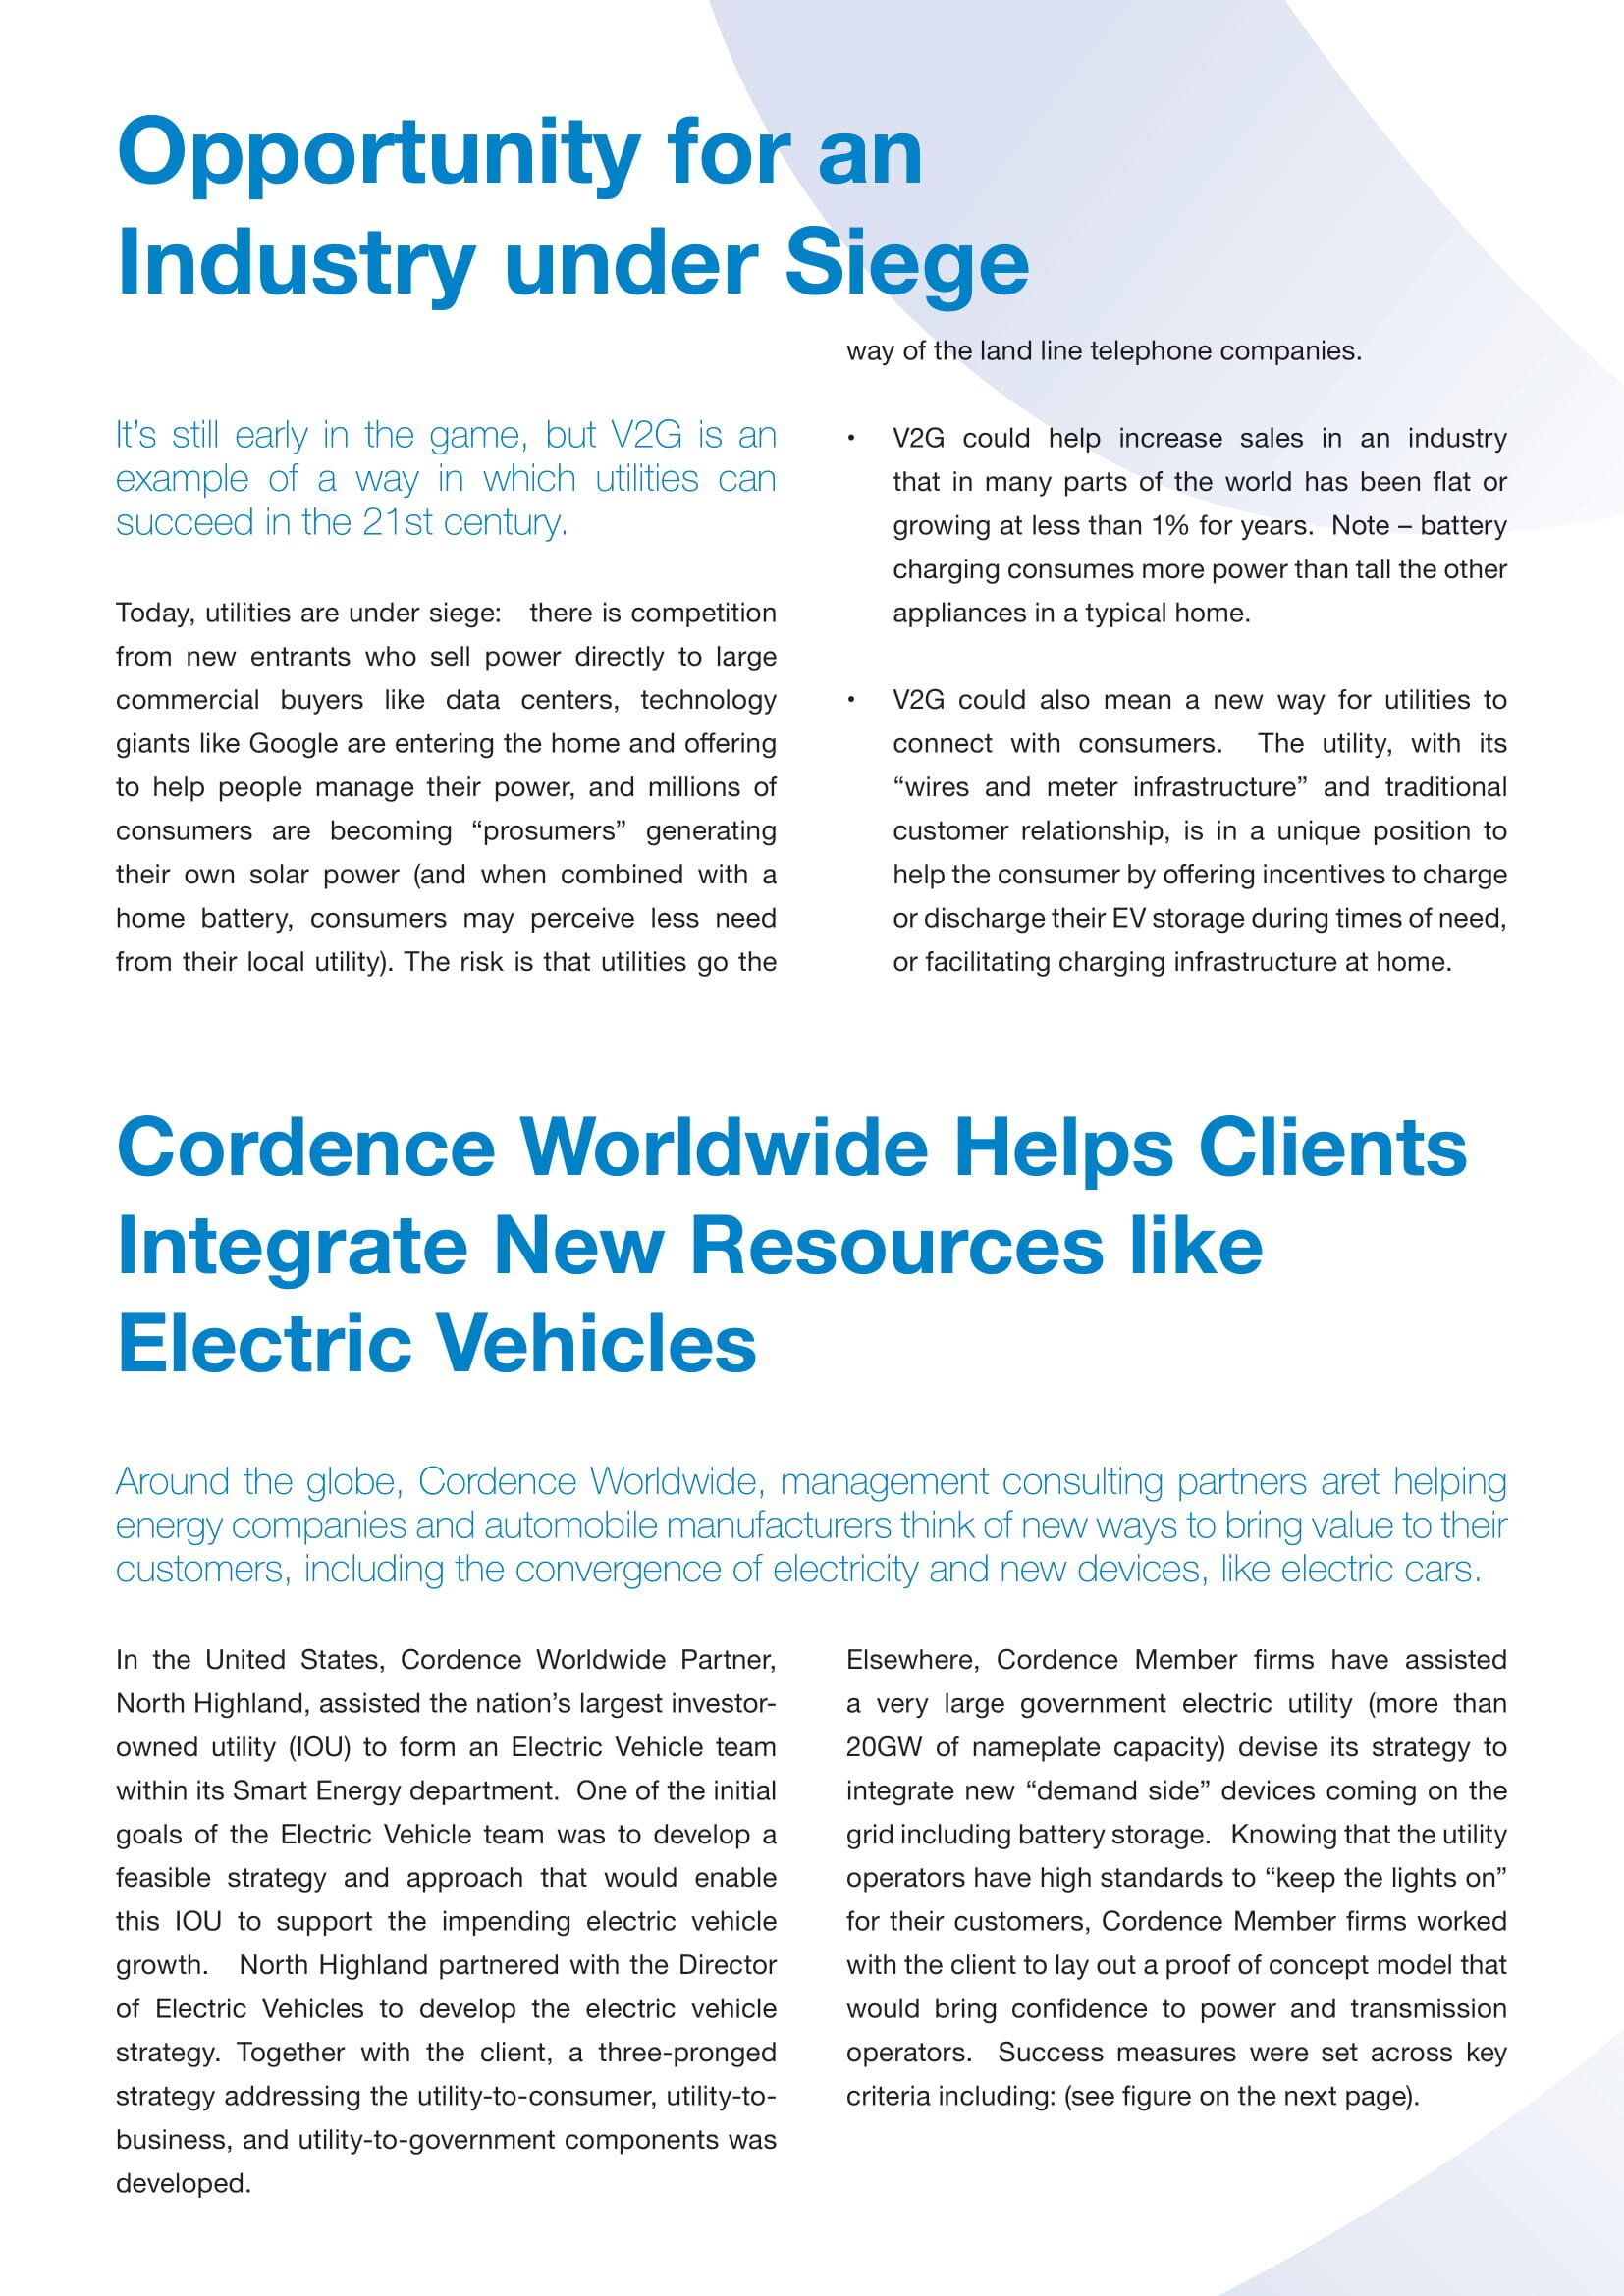 Electric Vehicles - a Killer App for Utilities-07.jpg